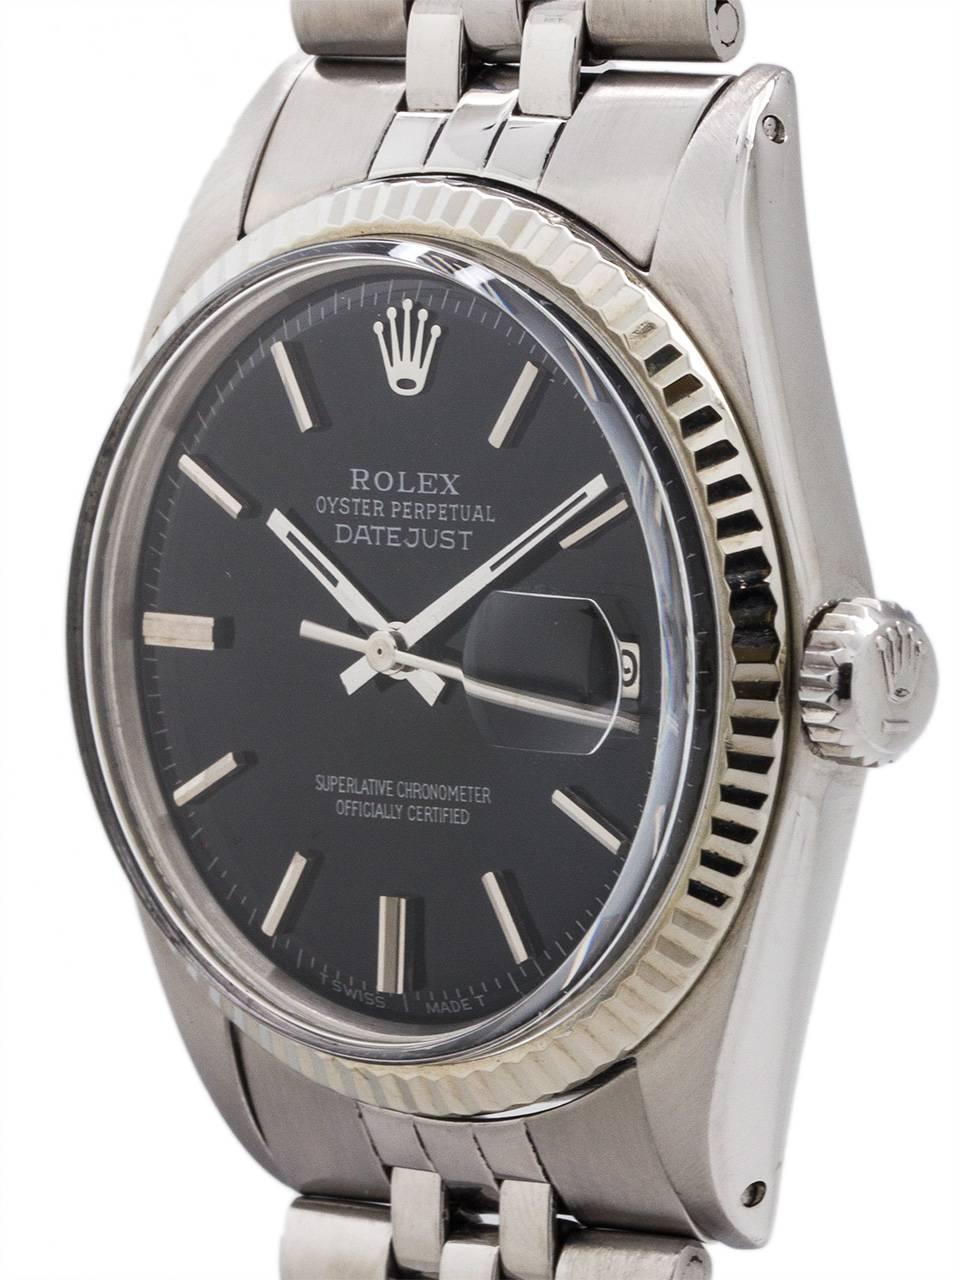 Vintage Rolex Datejust ref 1601 serial # 2.6 million circa 1970. Featuring 36mm diameter Oyster case with 14K white gold fluted bezel, acrylic crystal, and nicely restored glossy black pie pan dial with applied silver indexes and silver baton hands.